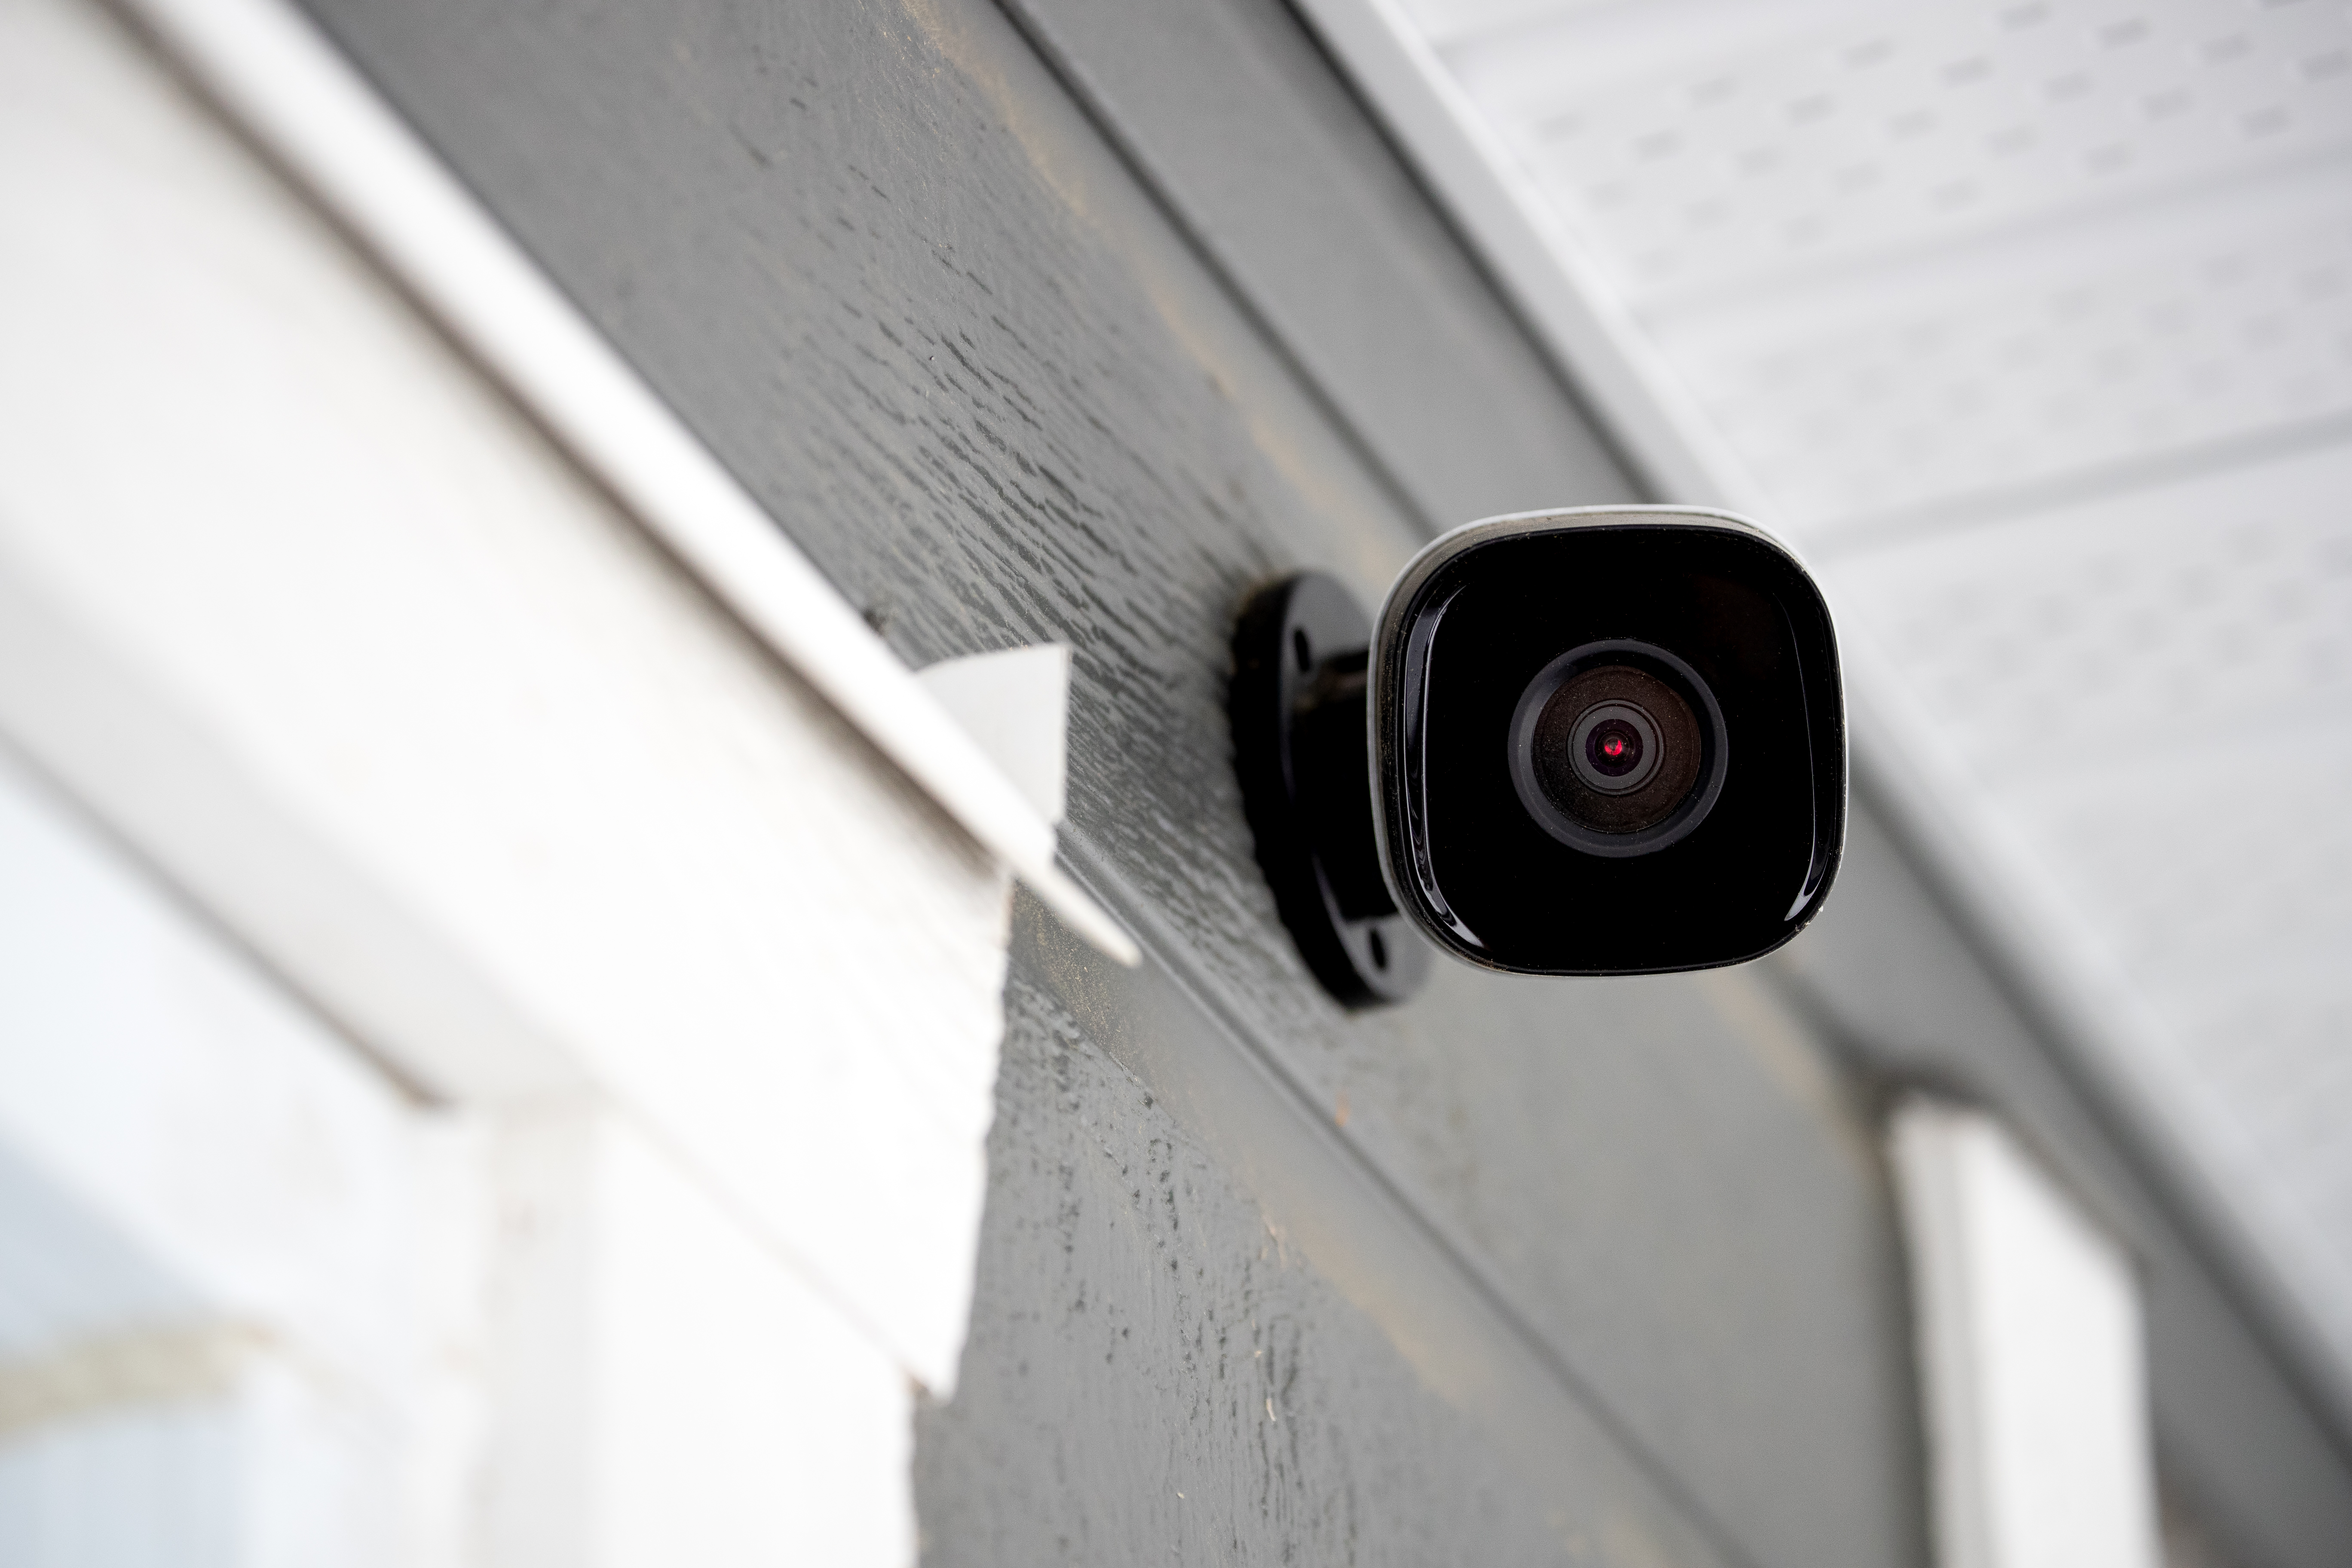 How To Install Nest Camera How to Install a Nest Camera | Hunker